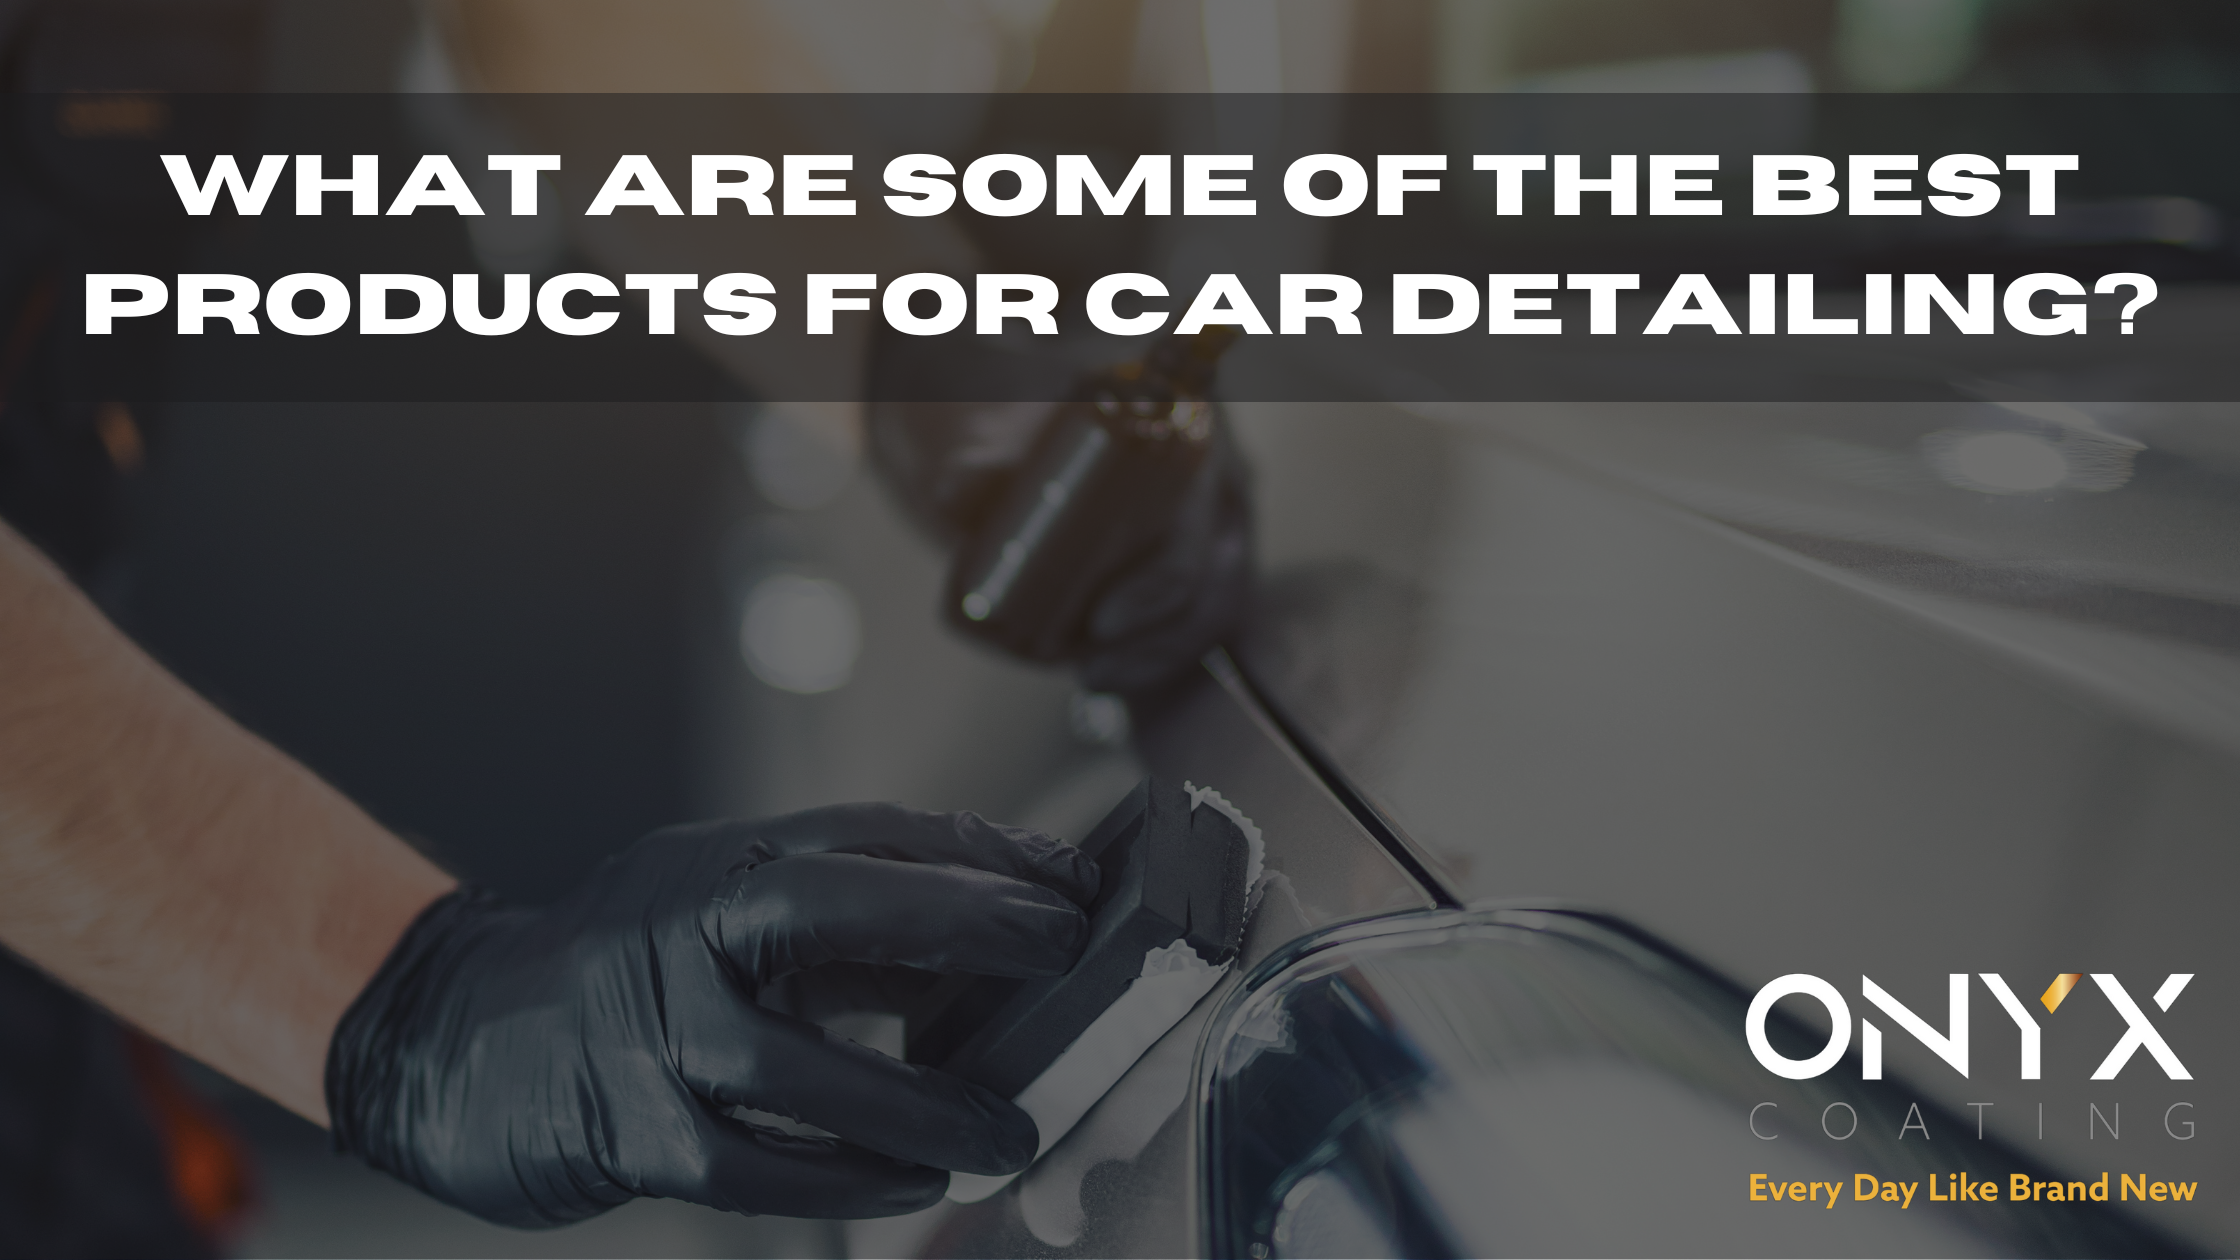 What are some of the best products for car detailing?